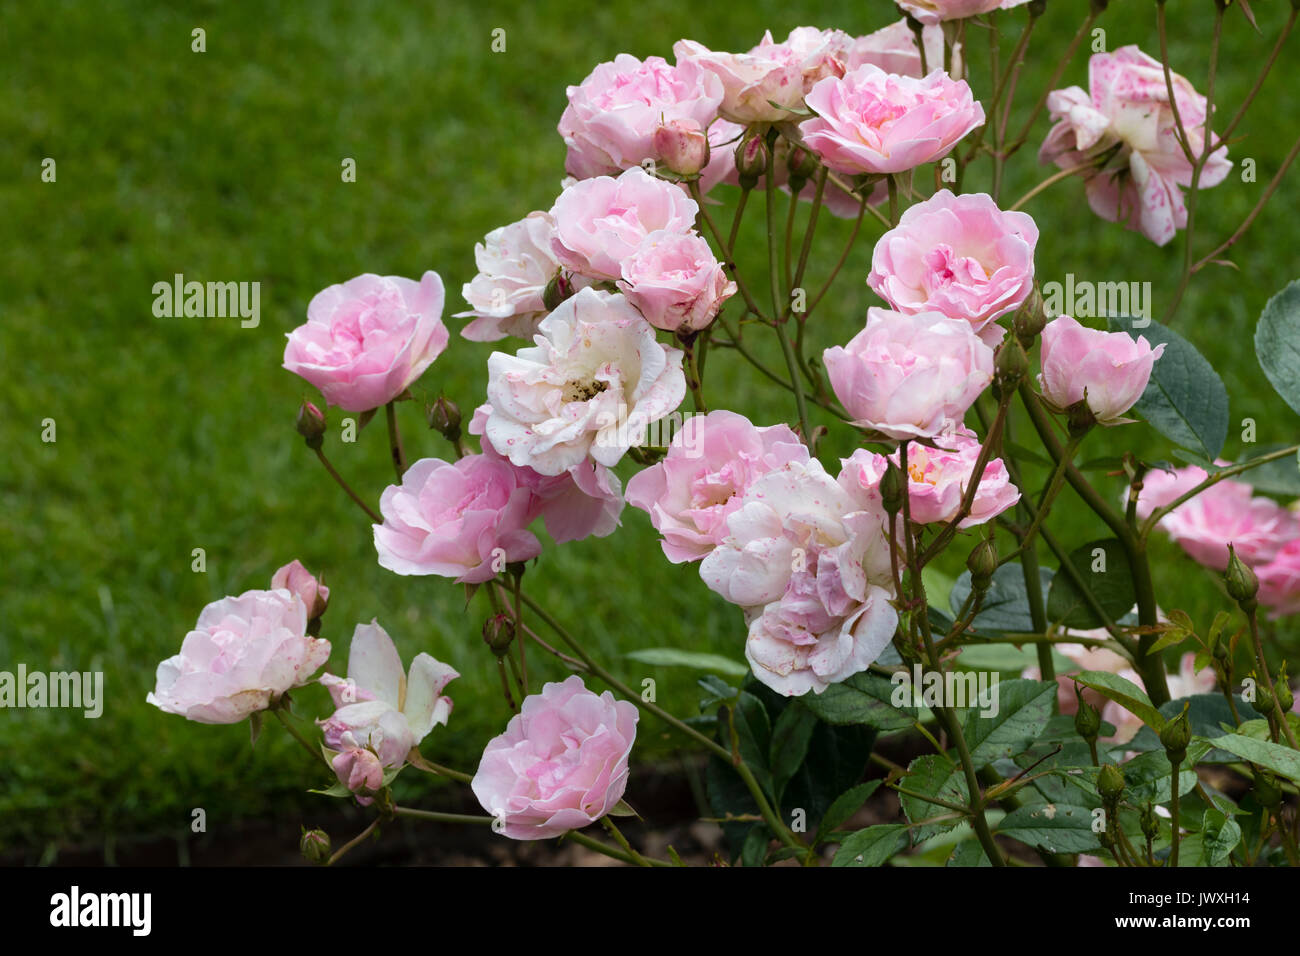 Pink blooms of the semi double dwarf polyantha rose, Rosa 'Nathalie Nypels' Stock Photo